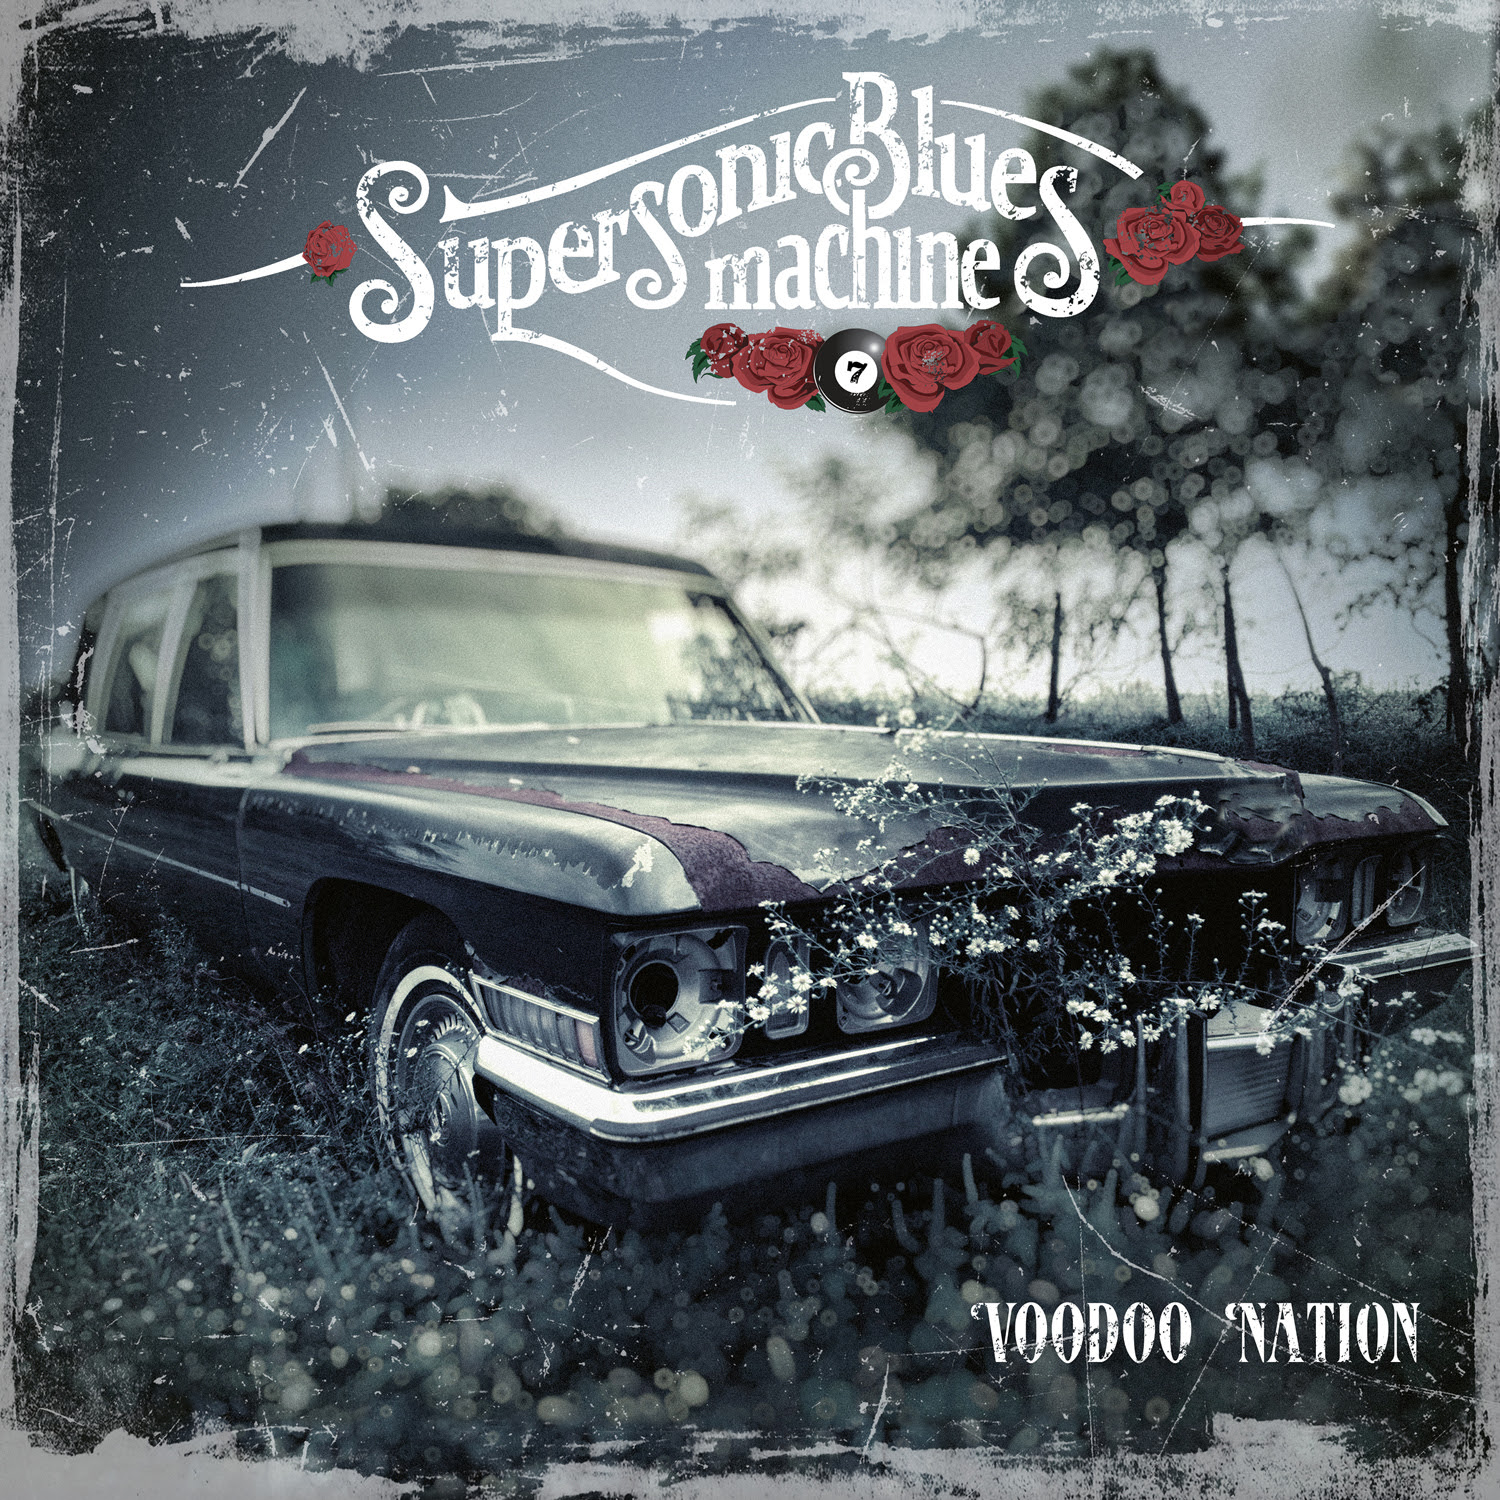 Blackberry Smoke's Charlie Starr feat. on new Supersonic Blues Machine single, out today